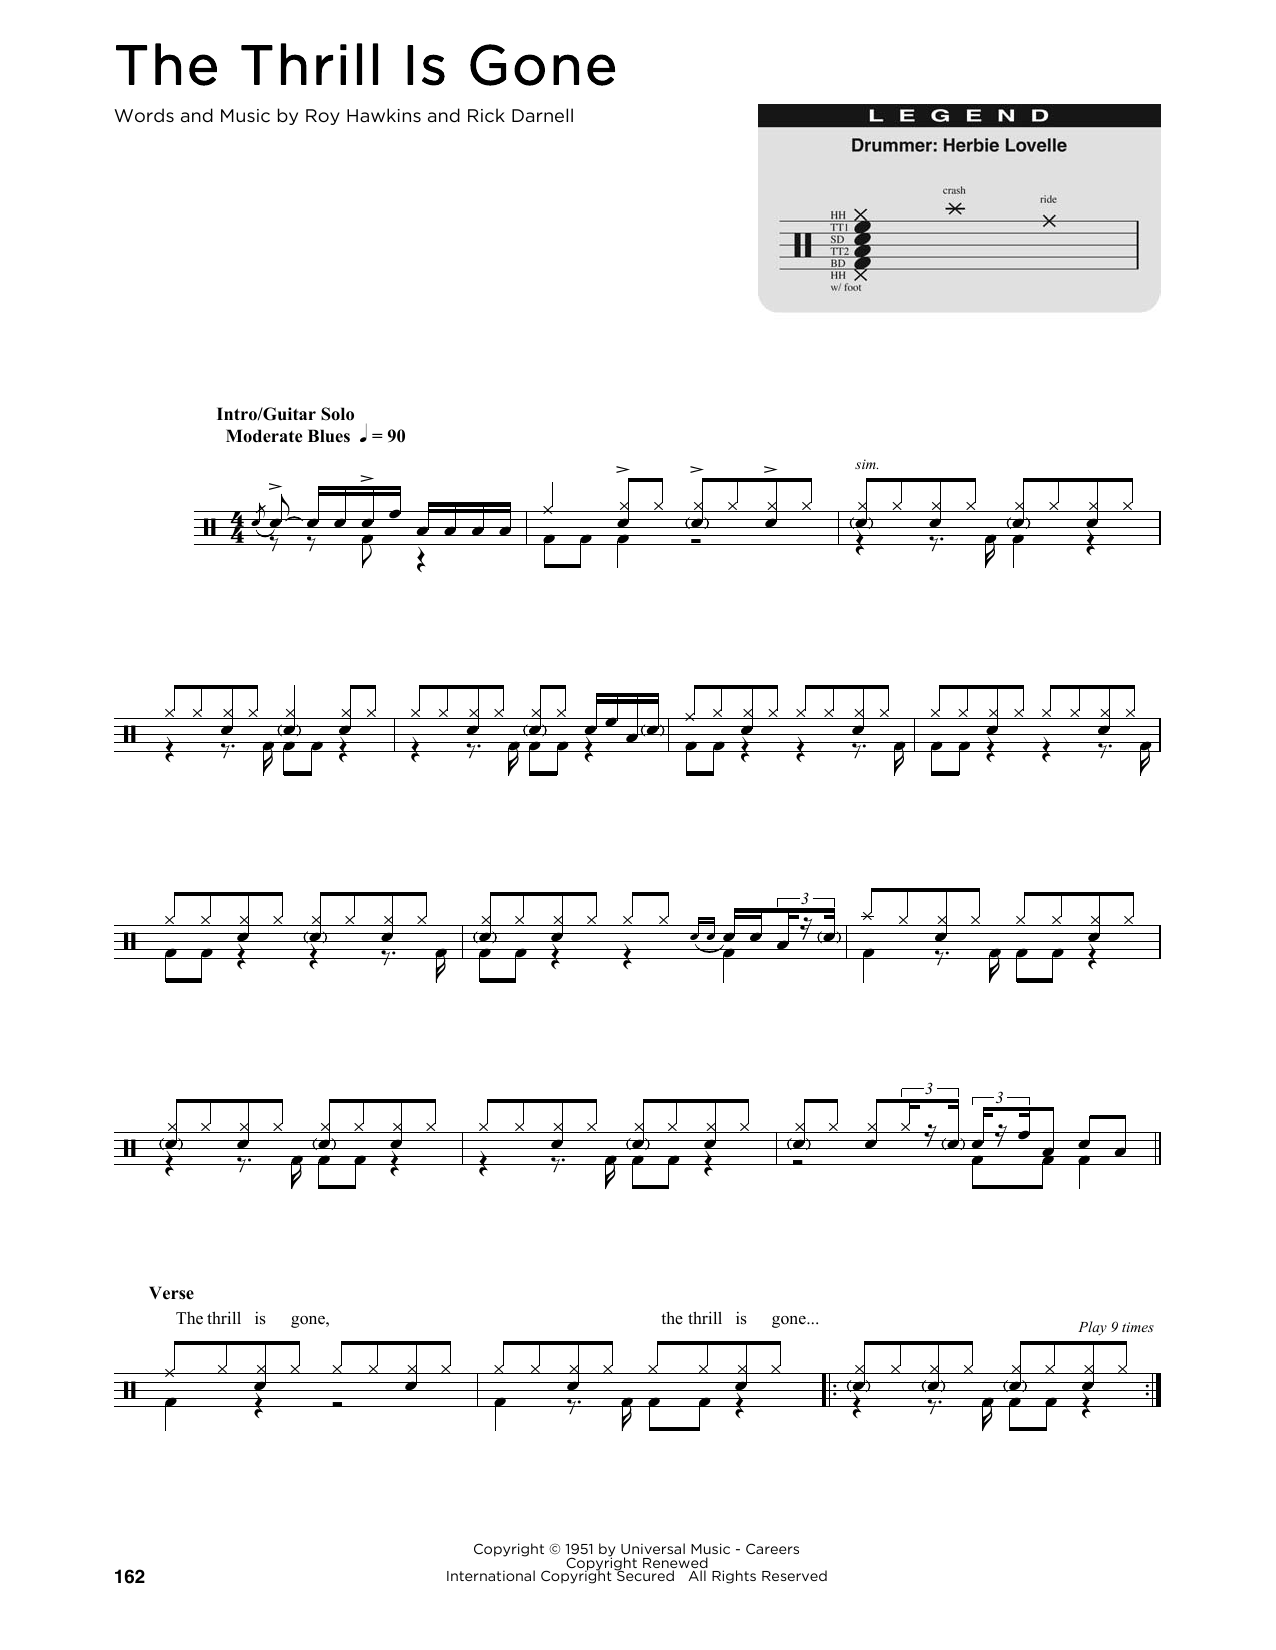 Download B.B. King The Thrill Is Gone Sheet Music